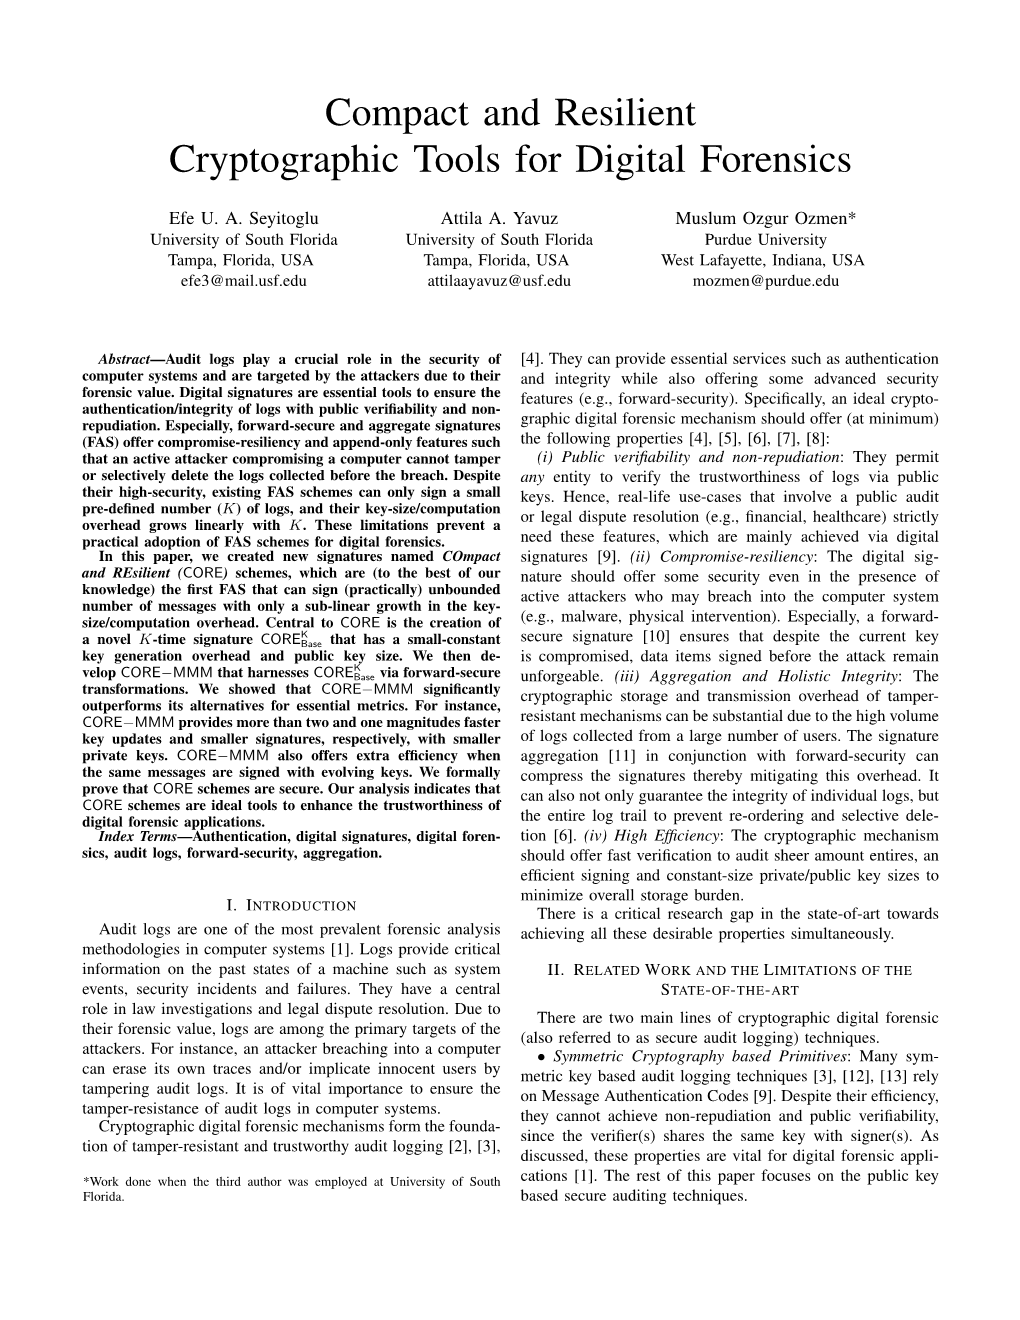 Compact and Resilient Cryptographic Tools for Digital Forensics